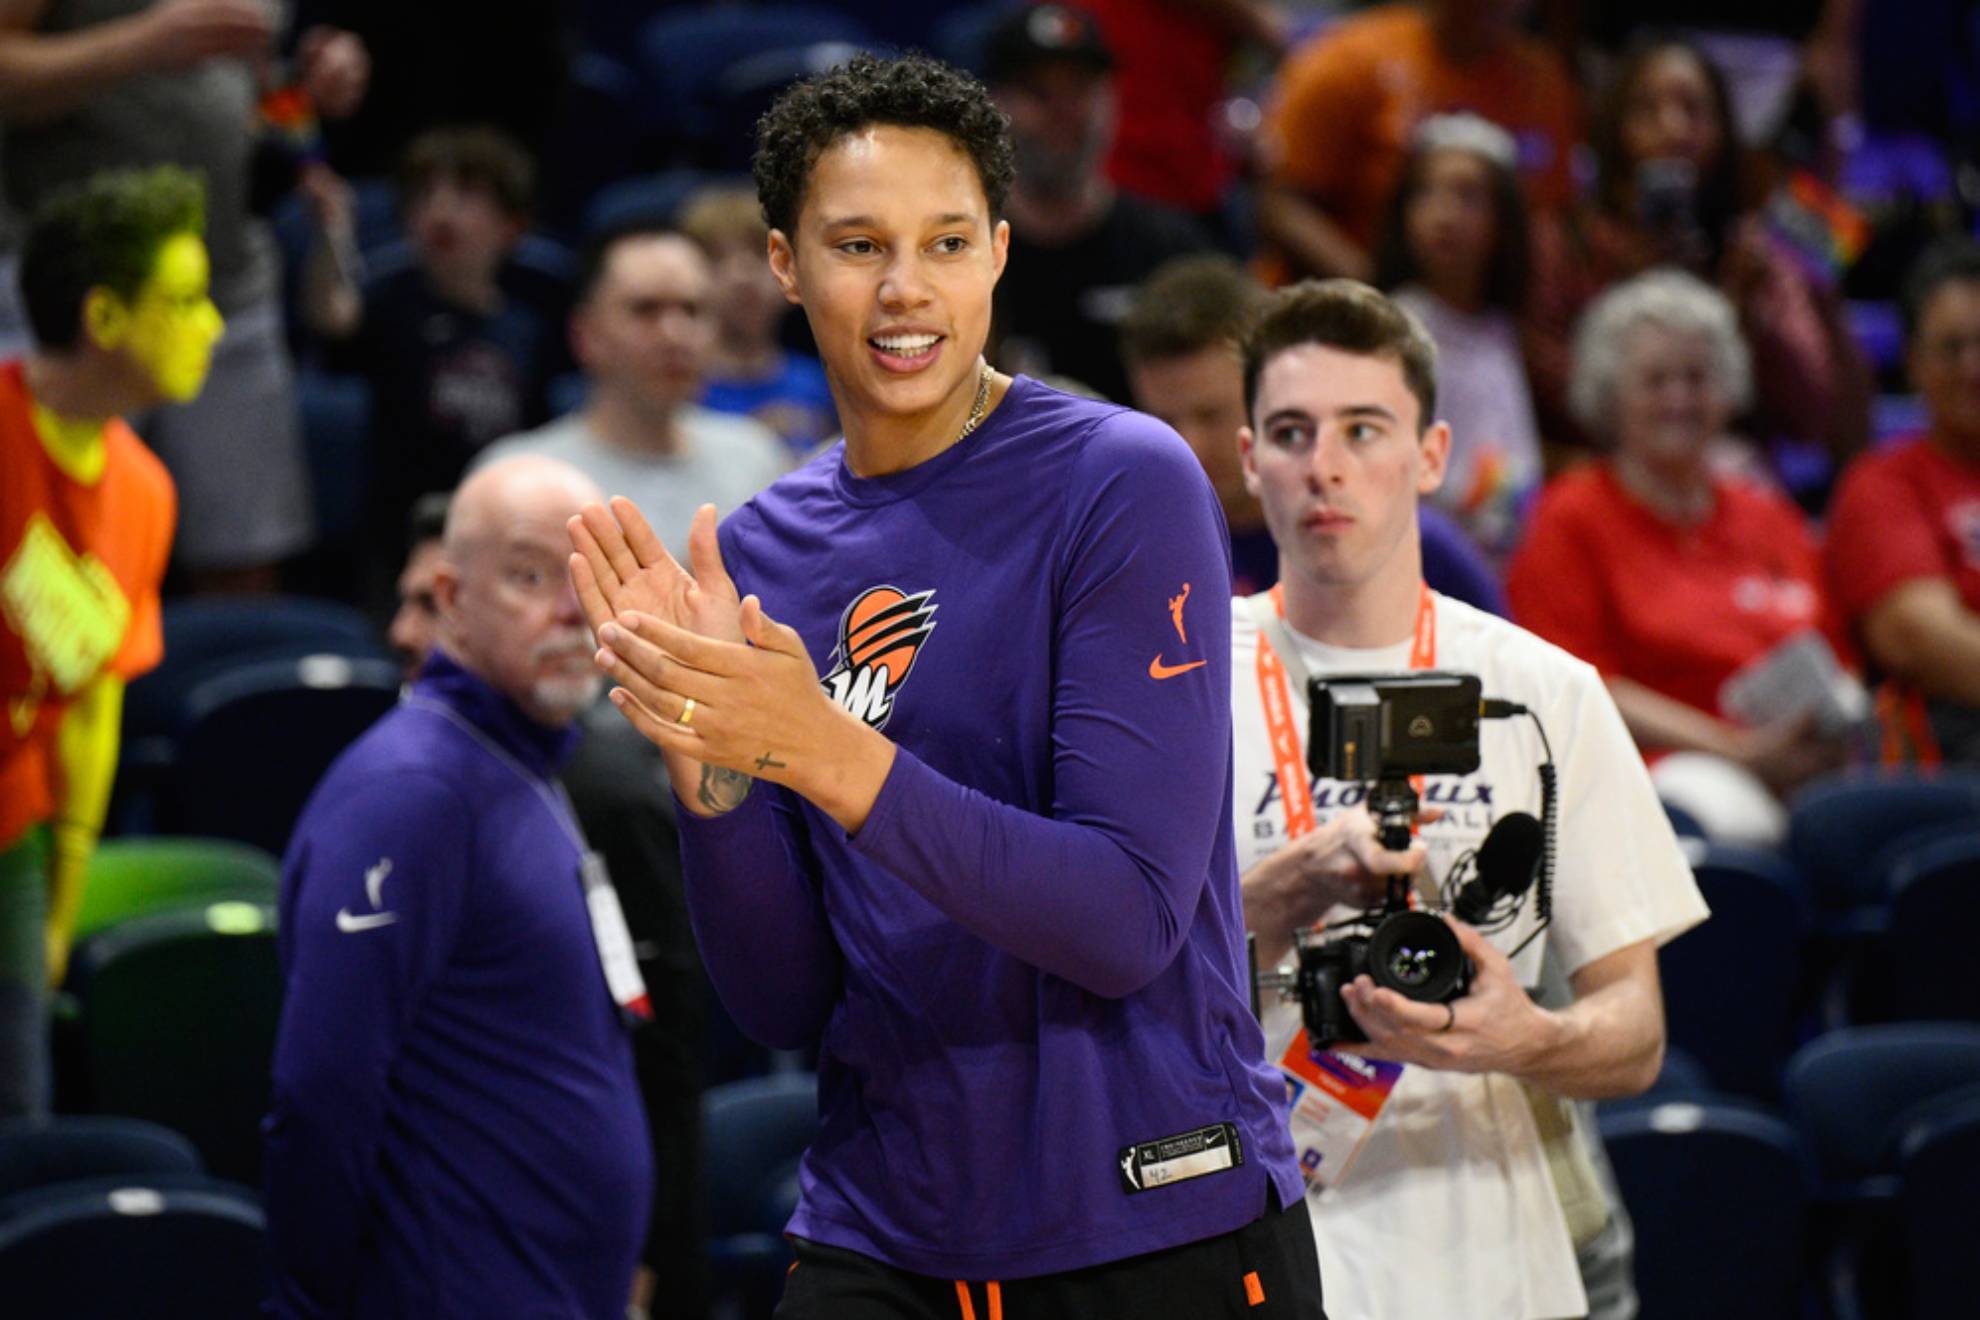 Brittney Griner chosen as an All-Star starter with Wilson and Stewart captains again